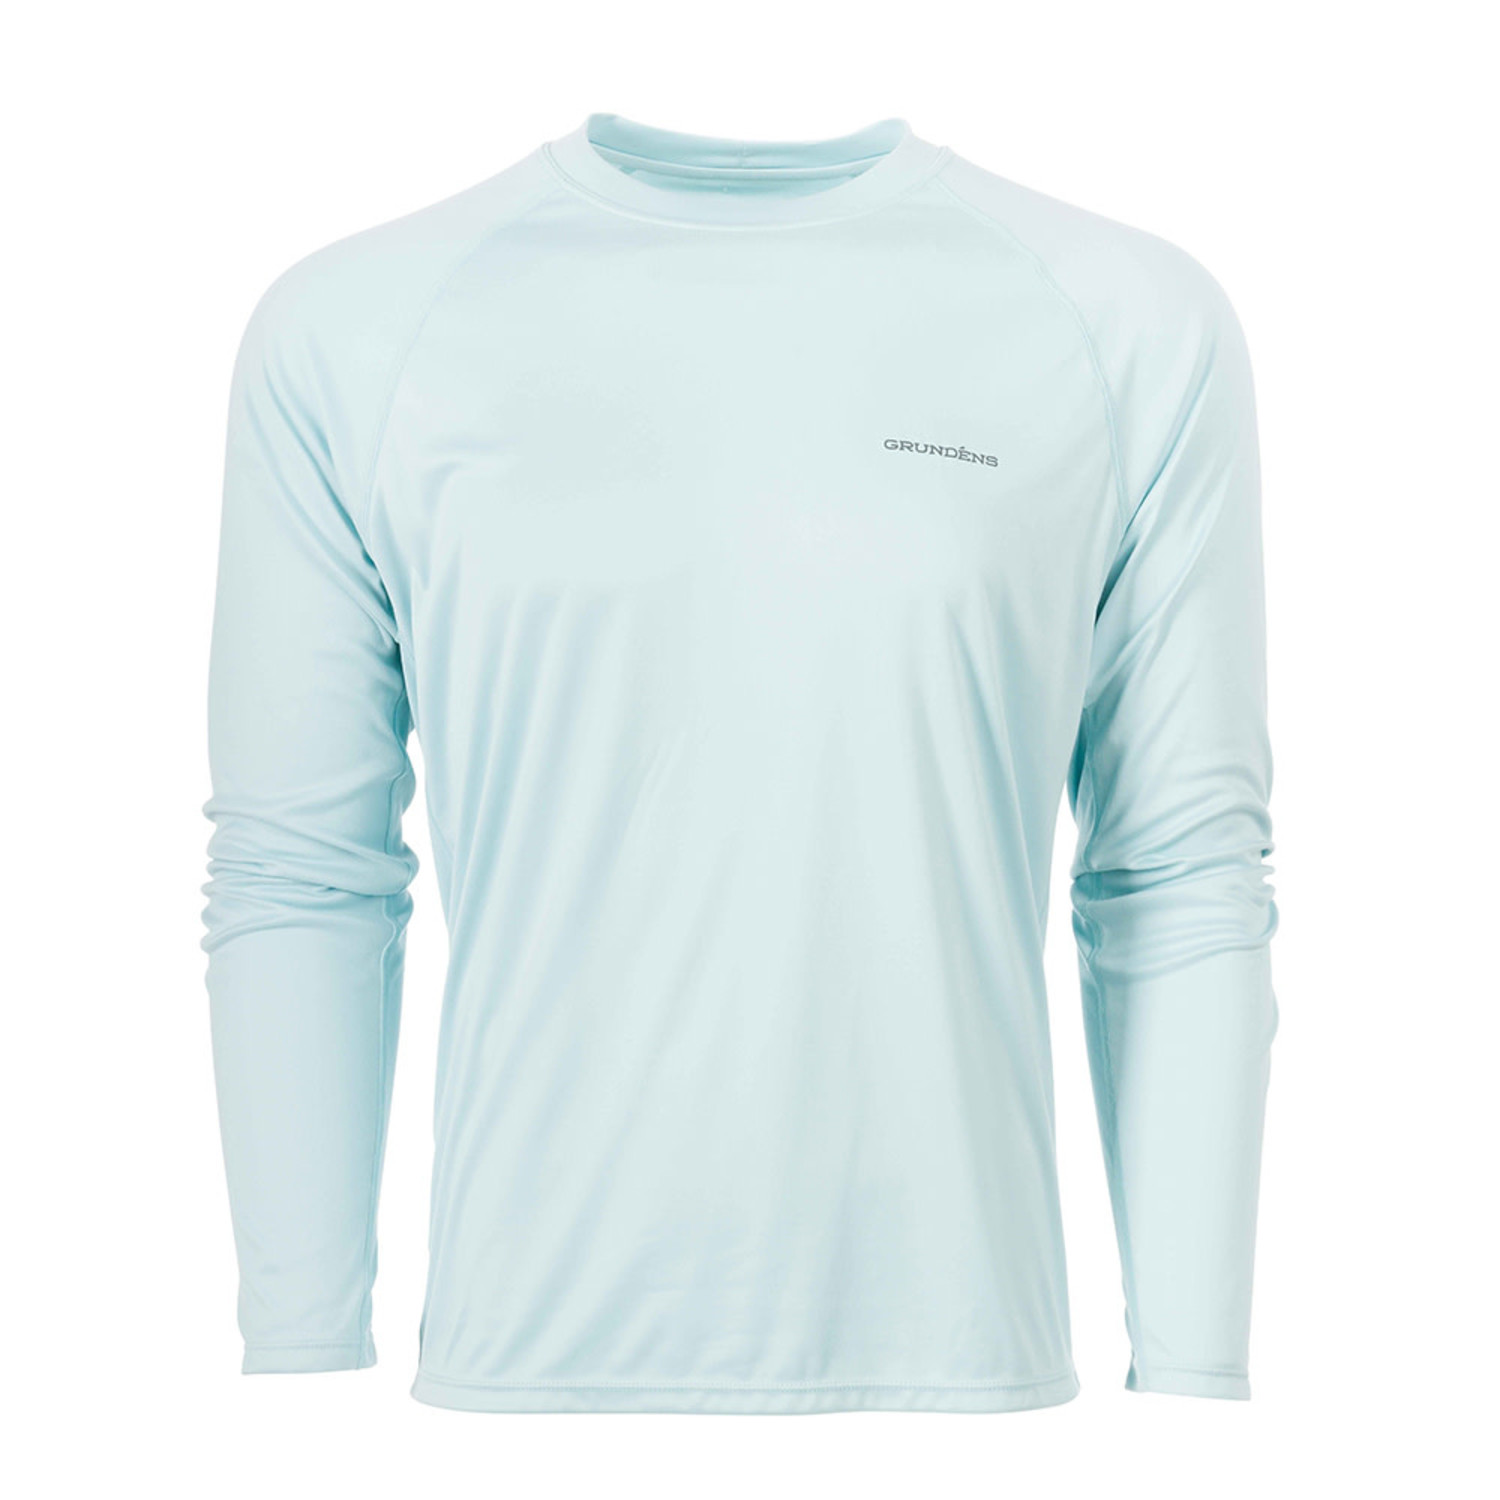 Grundens Solstrale Long Sleeve Crew Performance Shirt - Updated